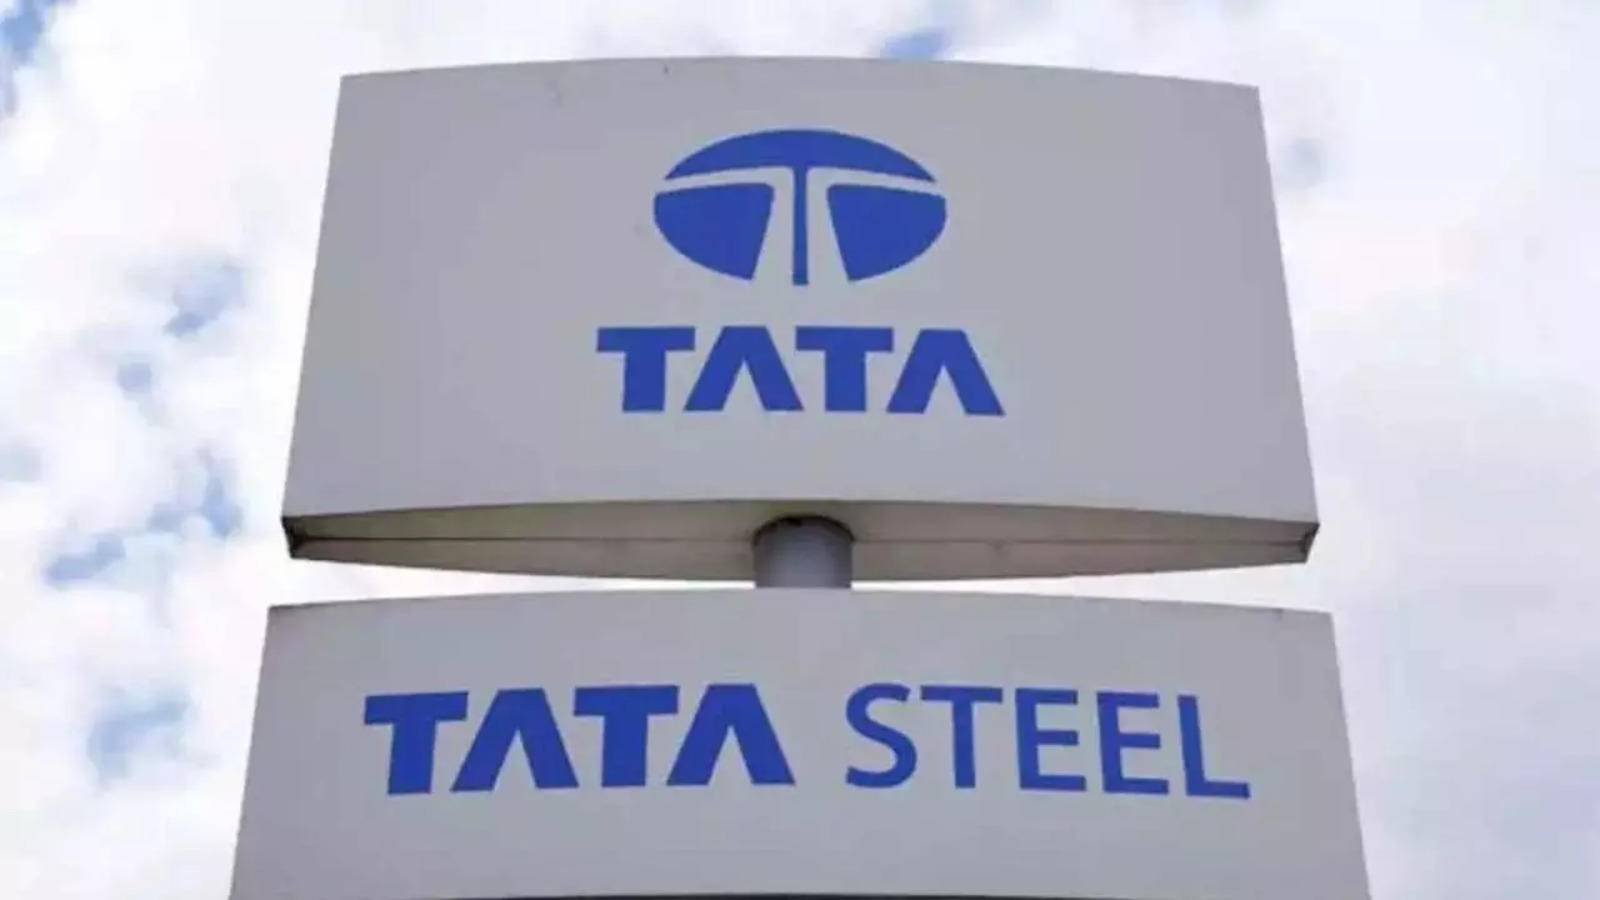 Tata Steel: number of employees 2023